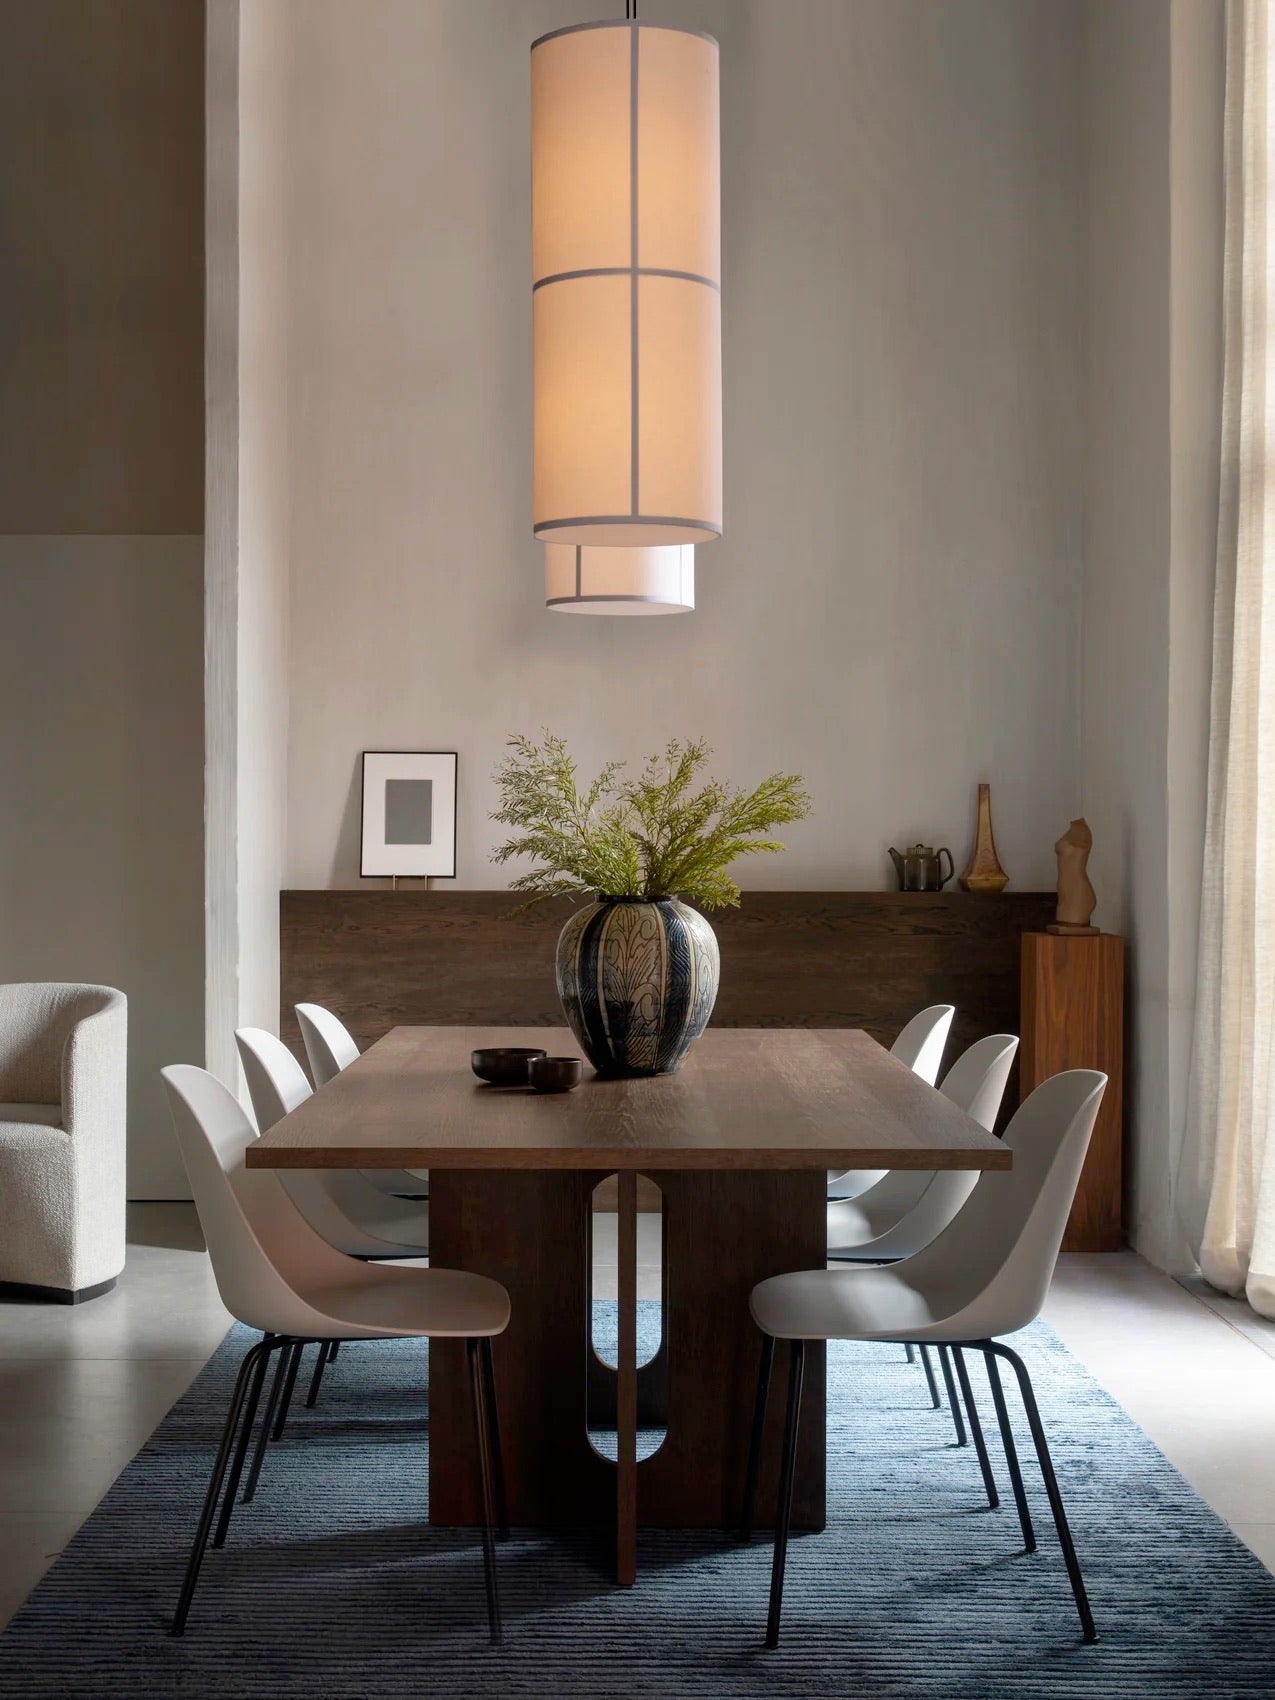 Dining table, chairs, lighting by Audo Copenhagen